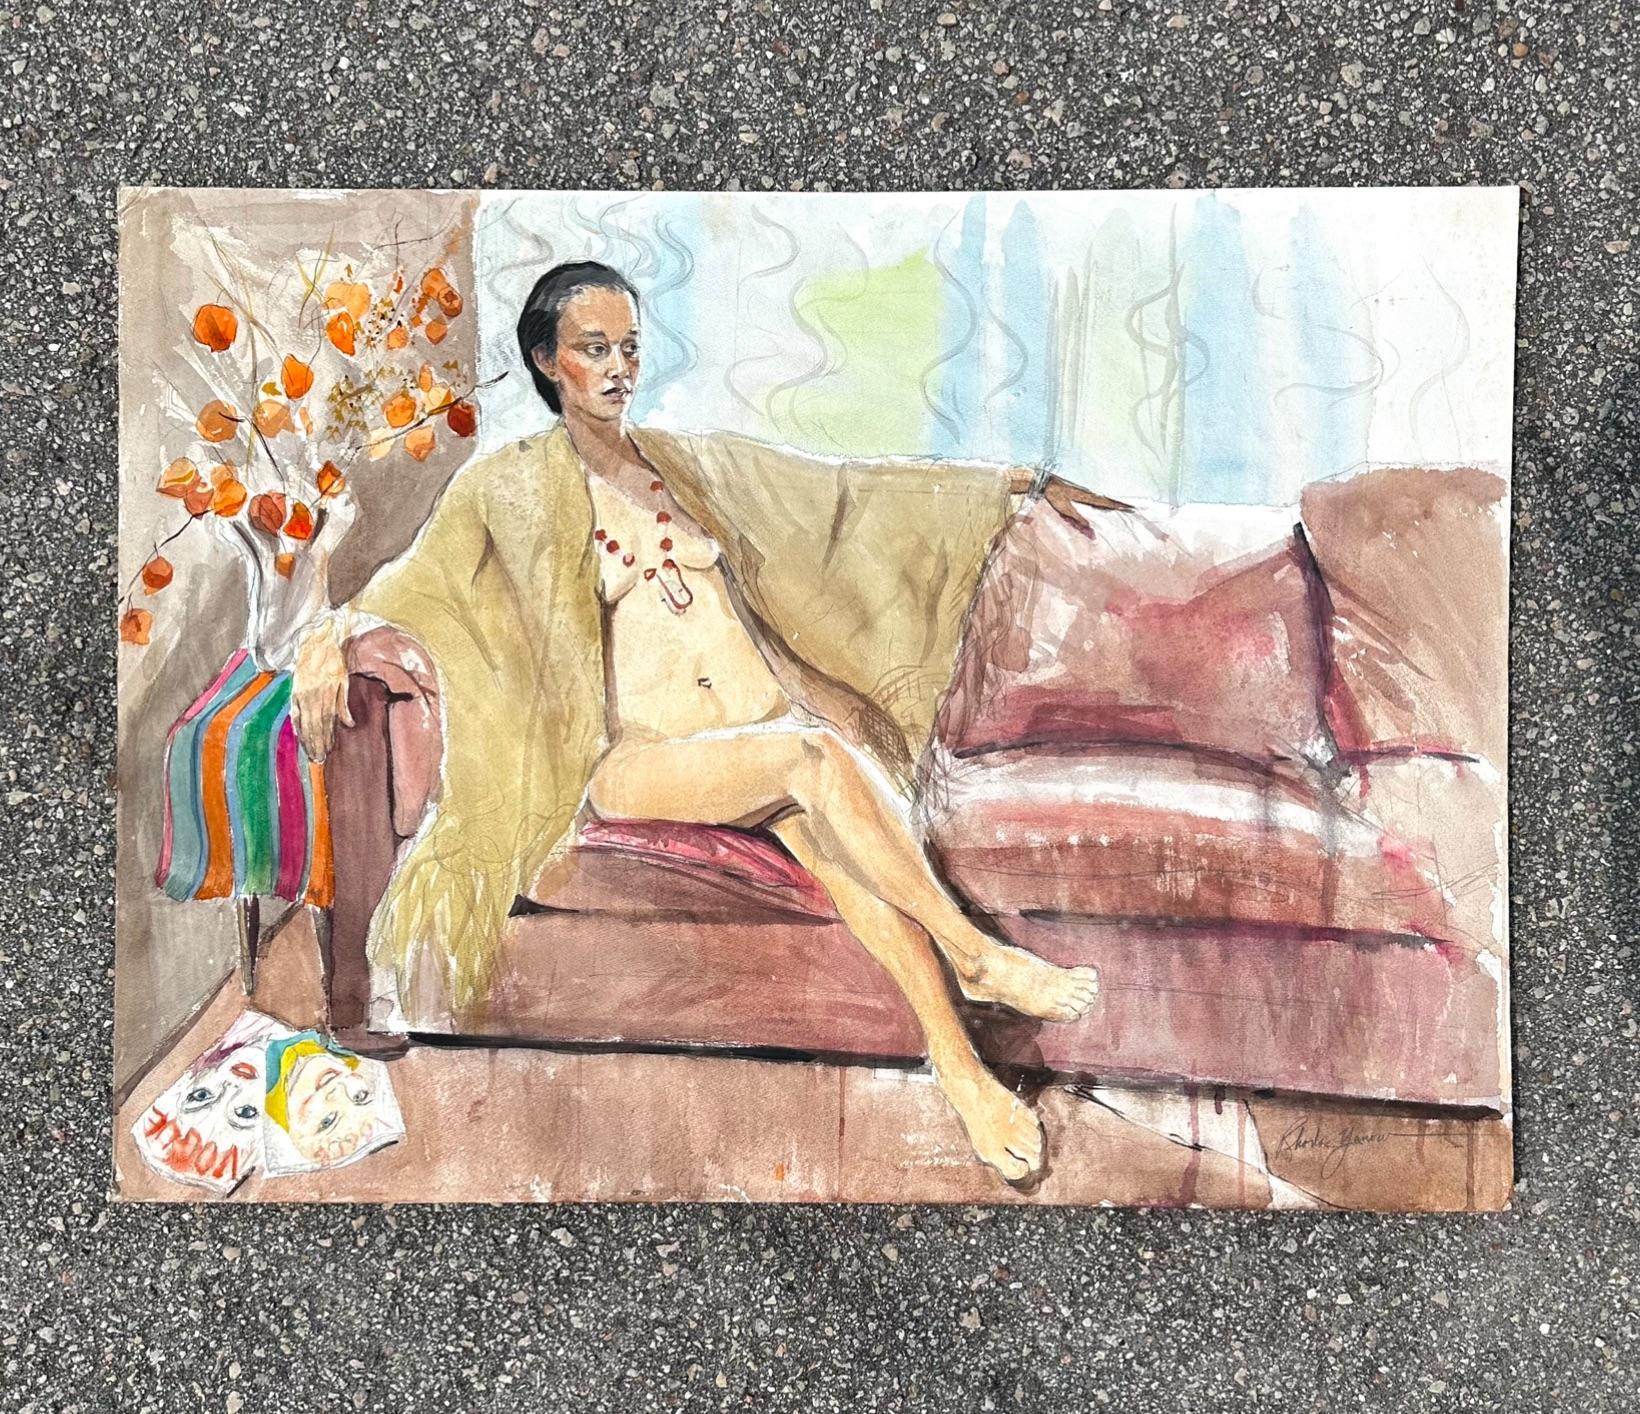 This Figural painting depicts a nude women in a beige shall reclined on a couch. The detail is gorgeous down to the photos seen laying on the floor, and the addition of maroon contrasting the sky blue abstract sky blue background makes this piece